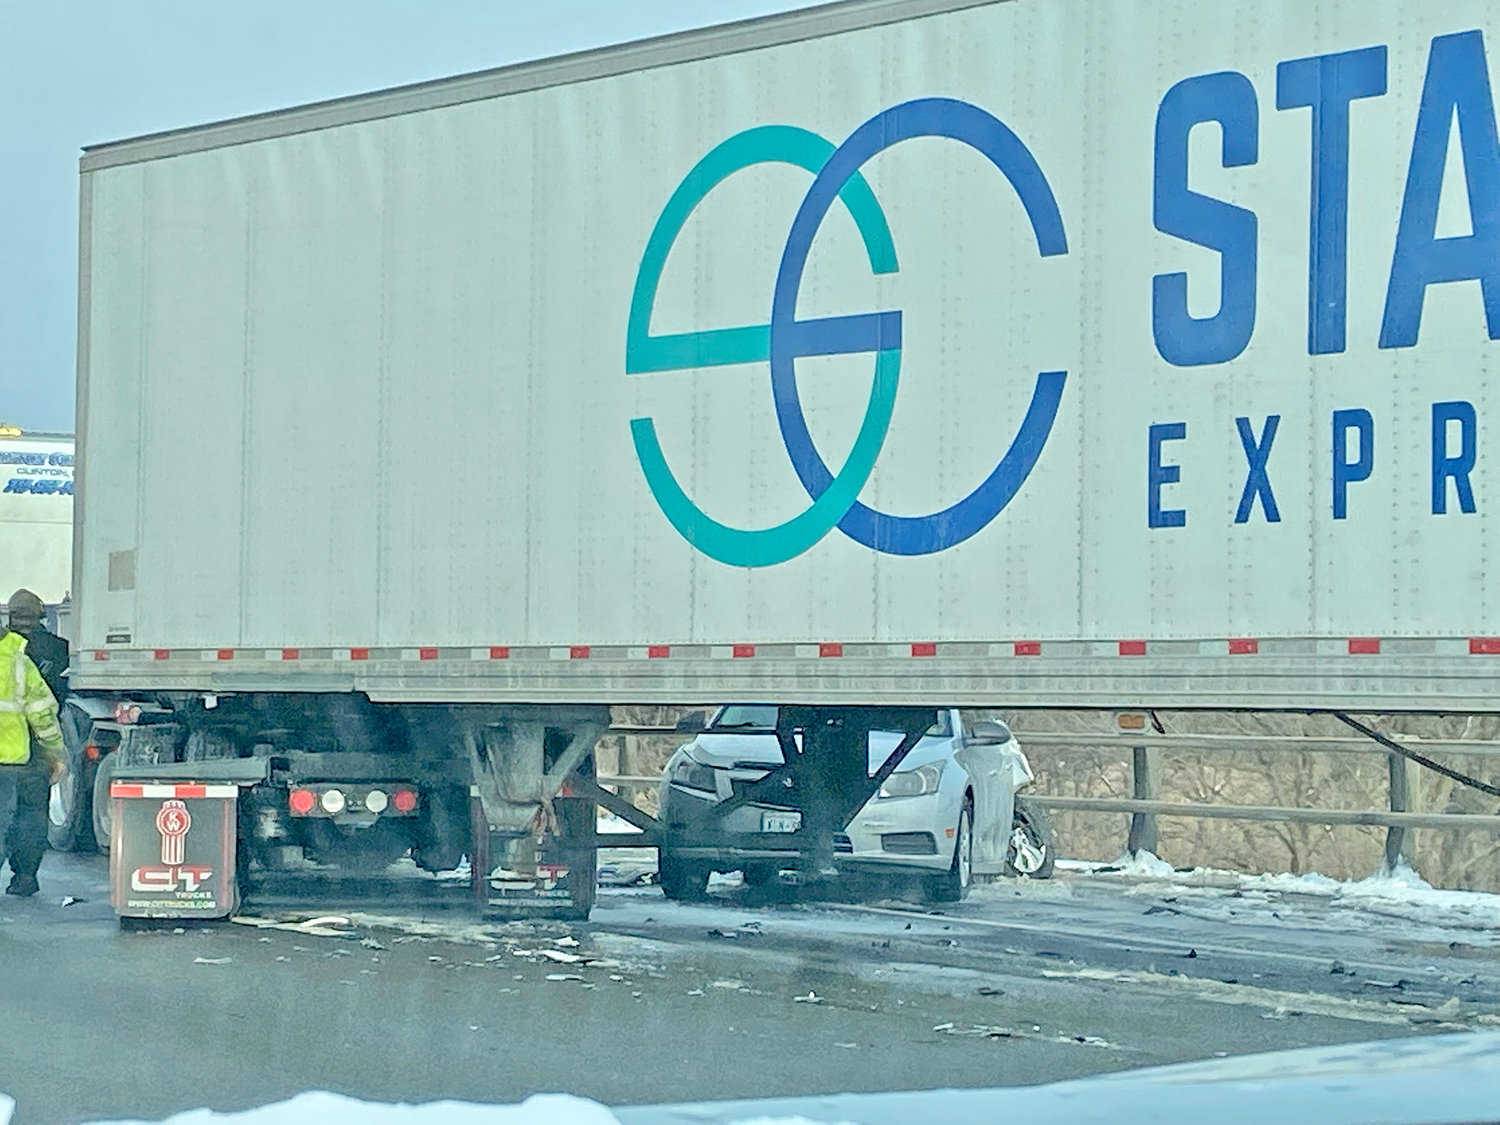 A multi-vehicle crash closed part of NYS Thruway on Sunday, March 19.